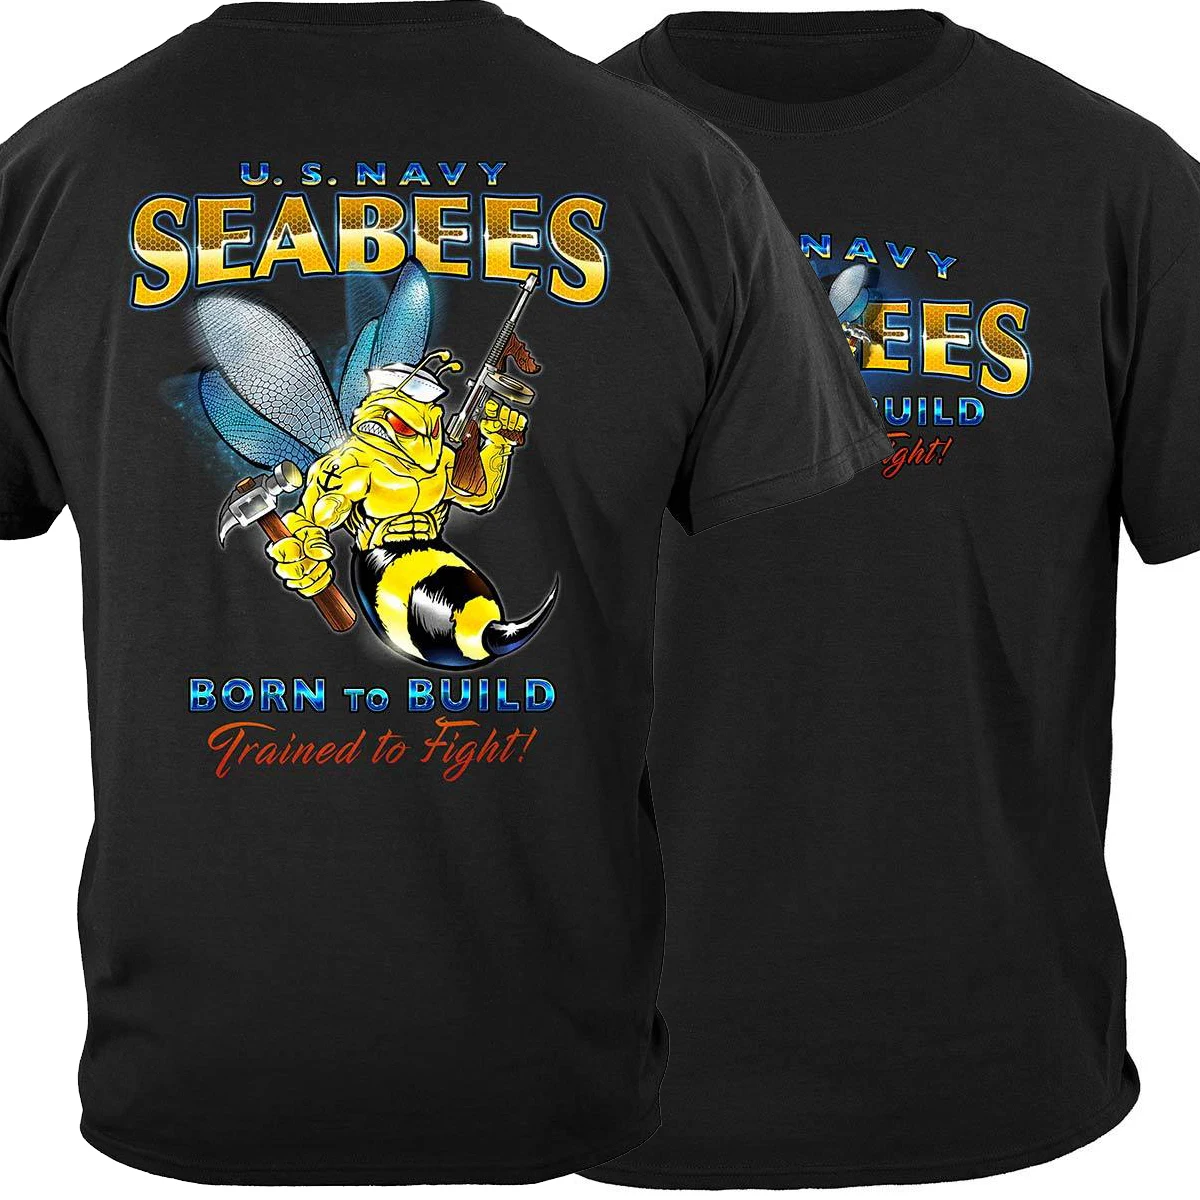 

Born To Build, Trained To Fight. US Navy Sea Bees Troop T-Shirt. Summer Cotton O-Neck Short Sleeve Mens T Shirt New S-3XL